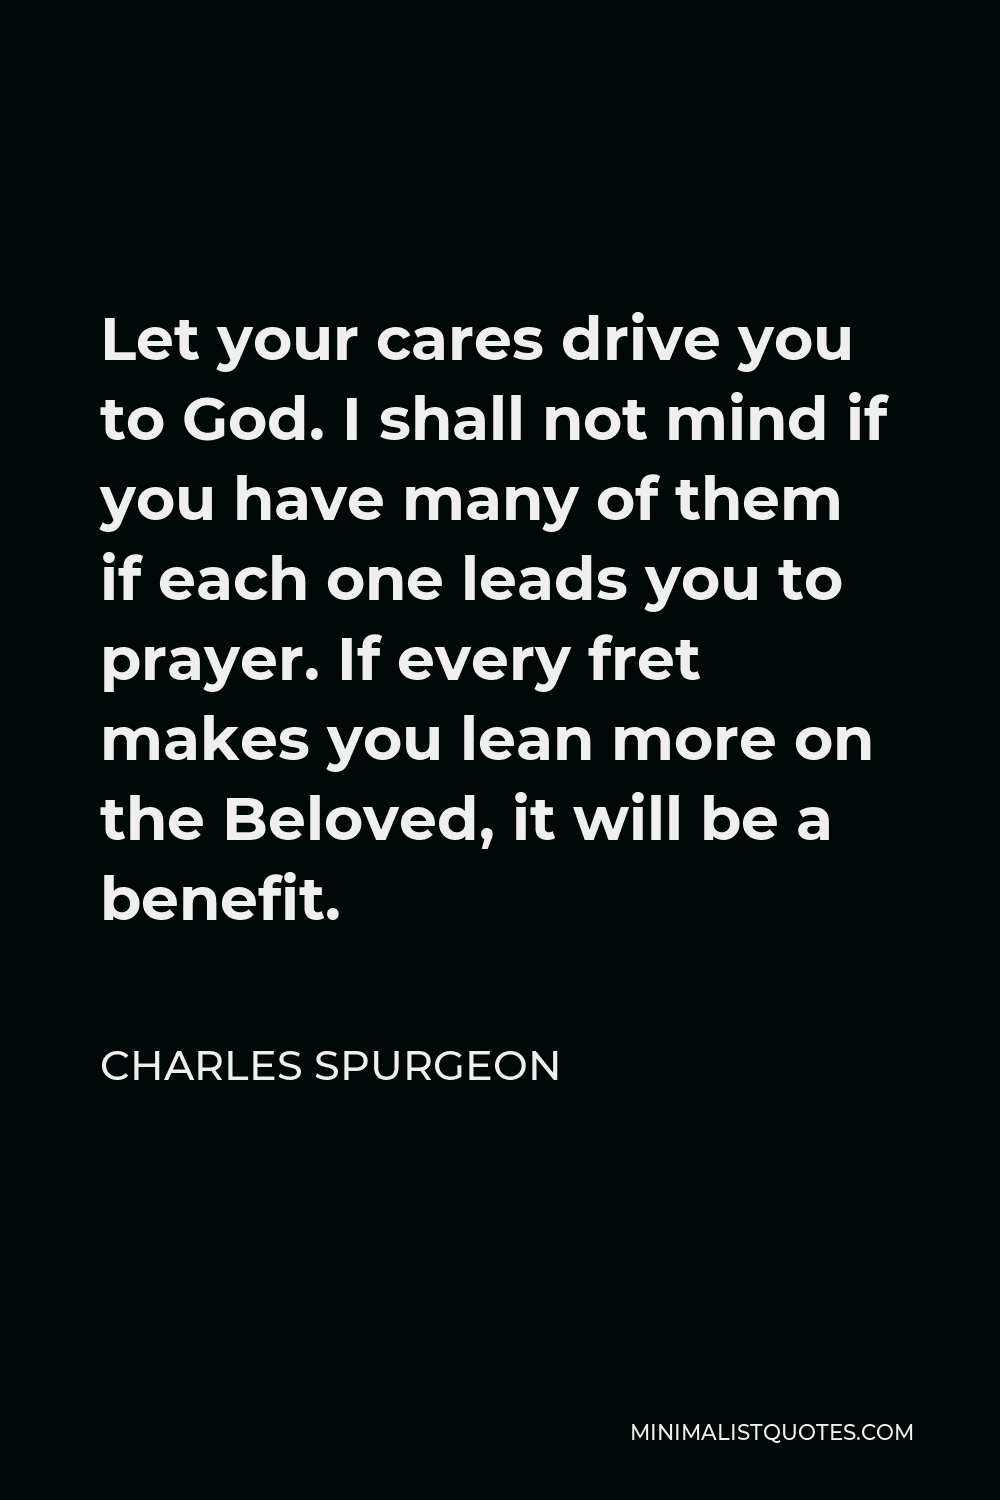 Charles Spurgeon Quote - Let your cares drive you to God. I shall not mind if you have many of them if each one leads you to prayer. If every fret makes you lean more on the Beloved, it will be a benefit.